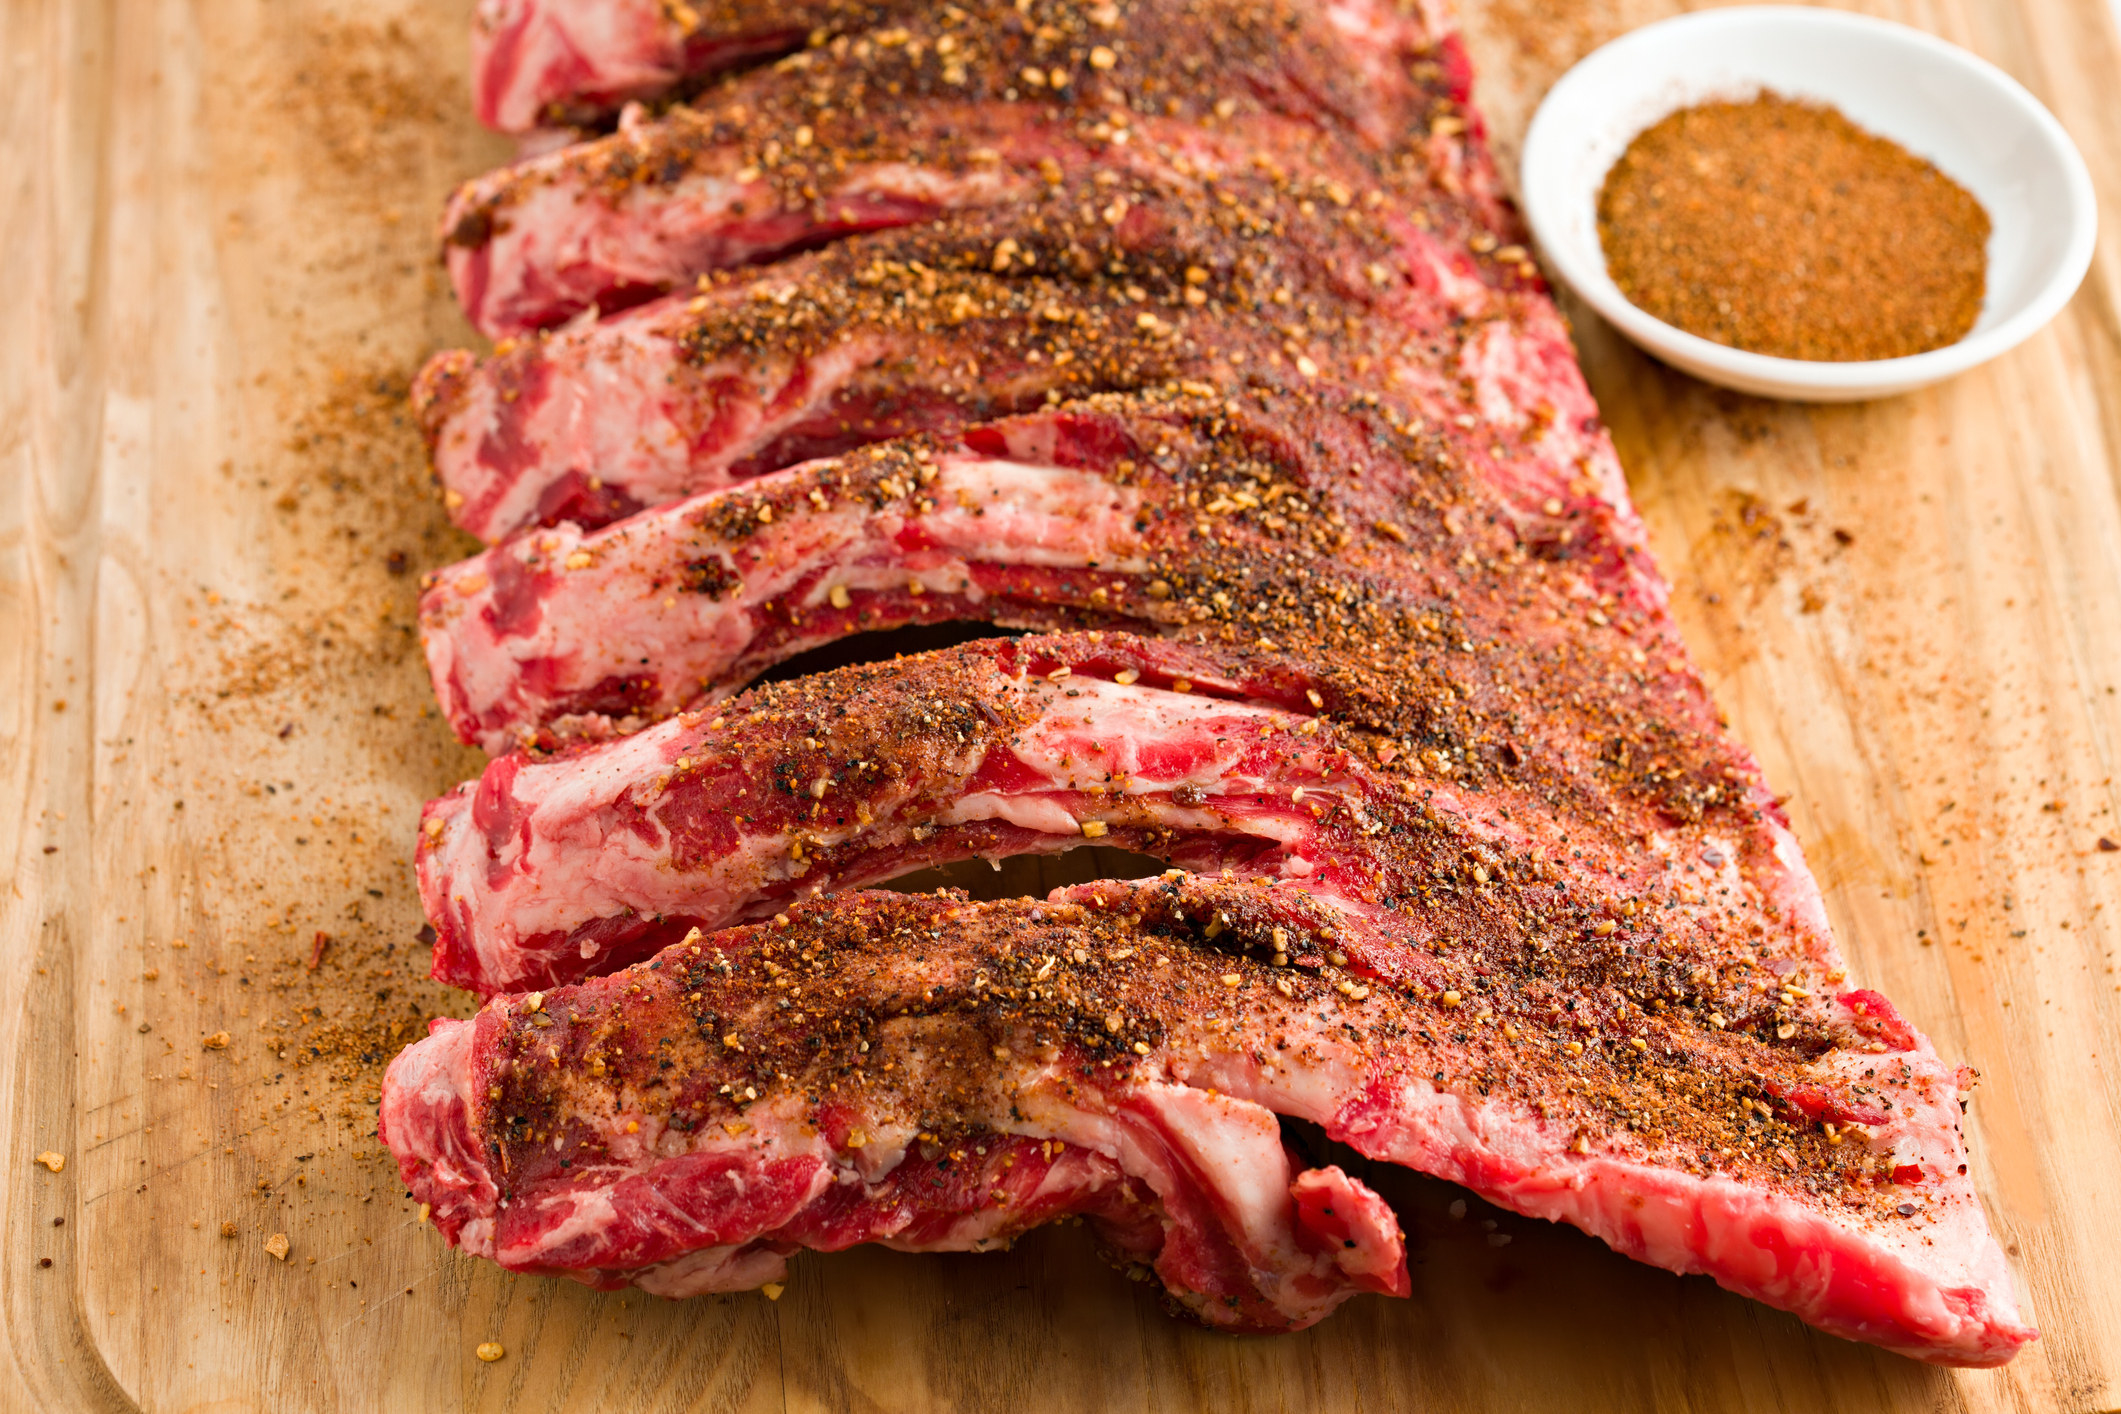 Meat with a dry rub.